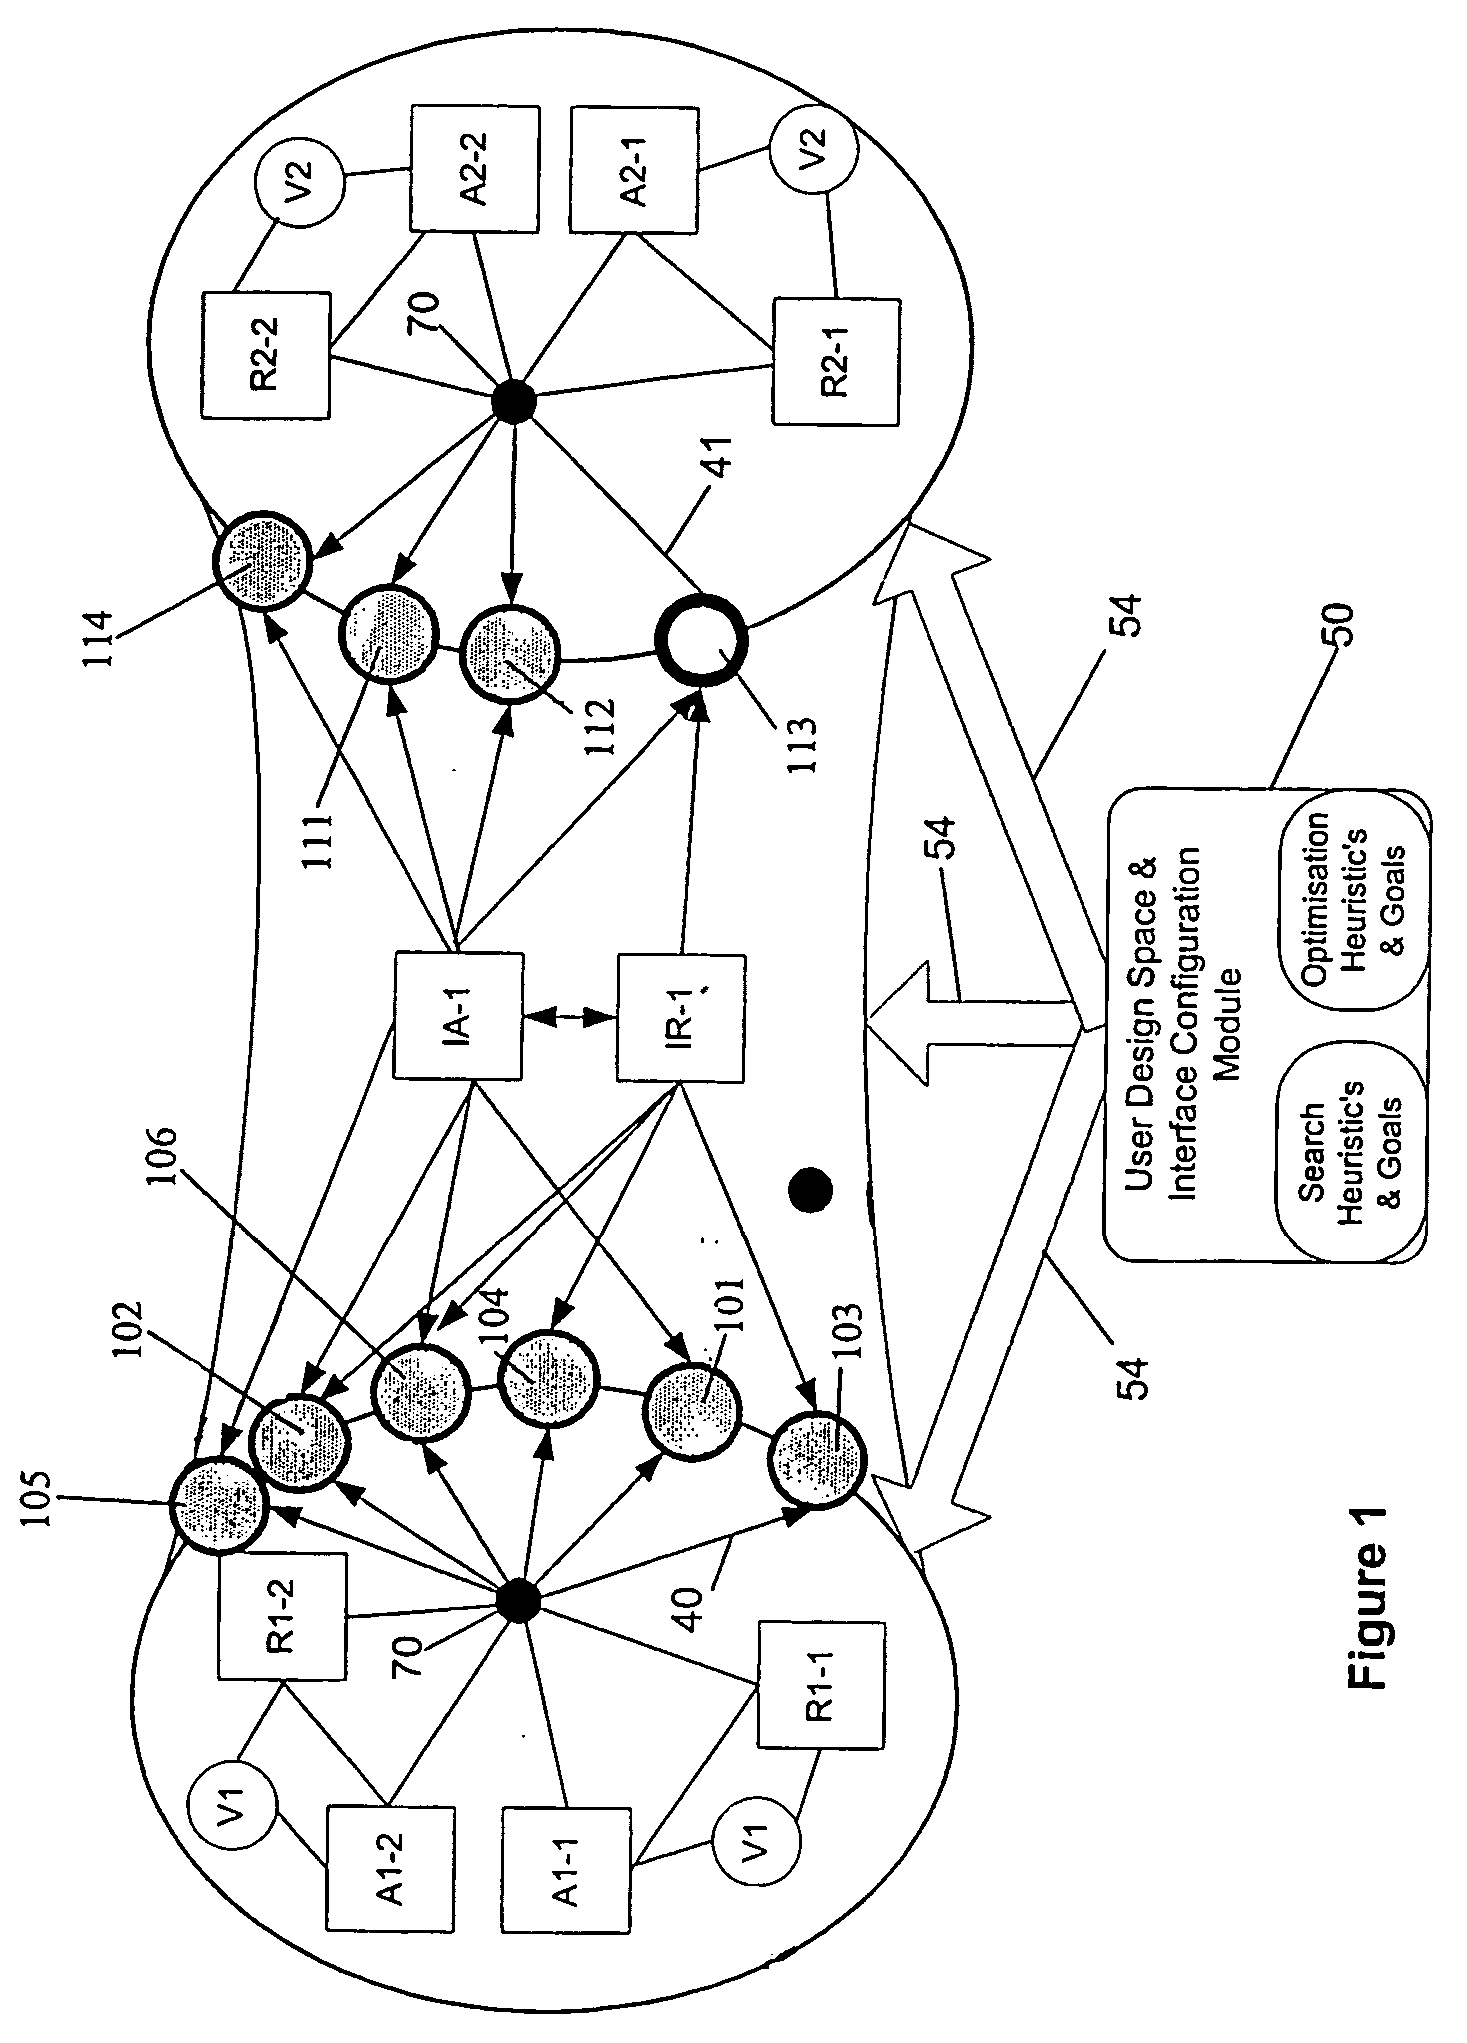 System and method for controlling a design process